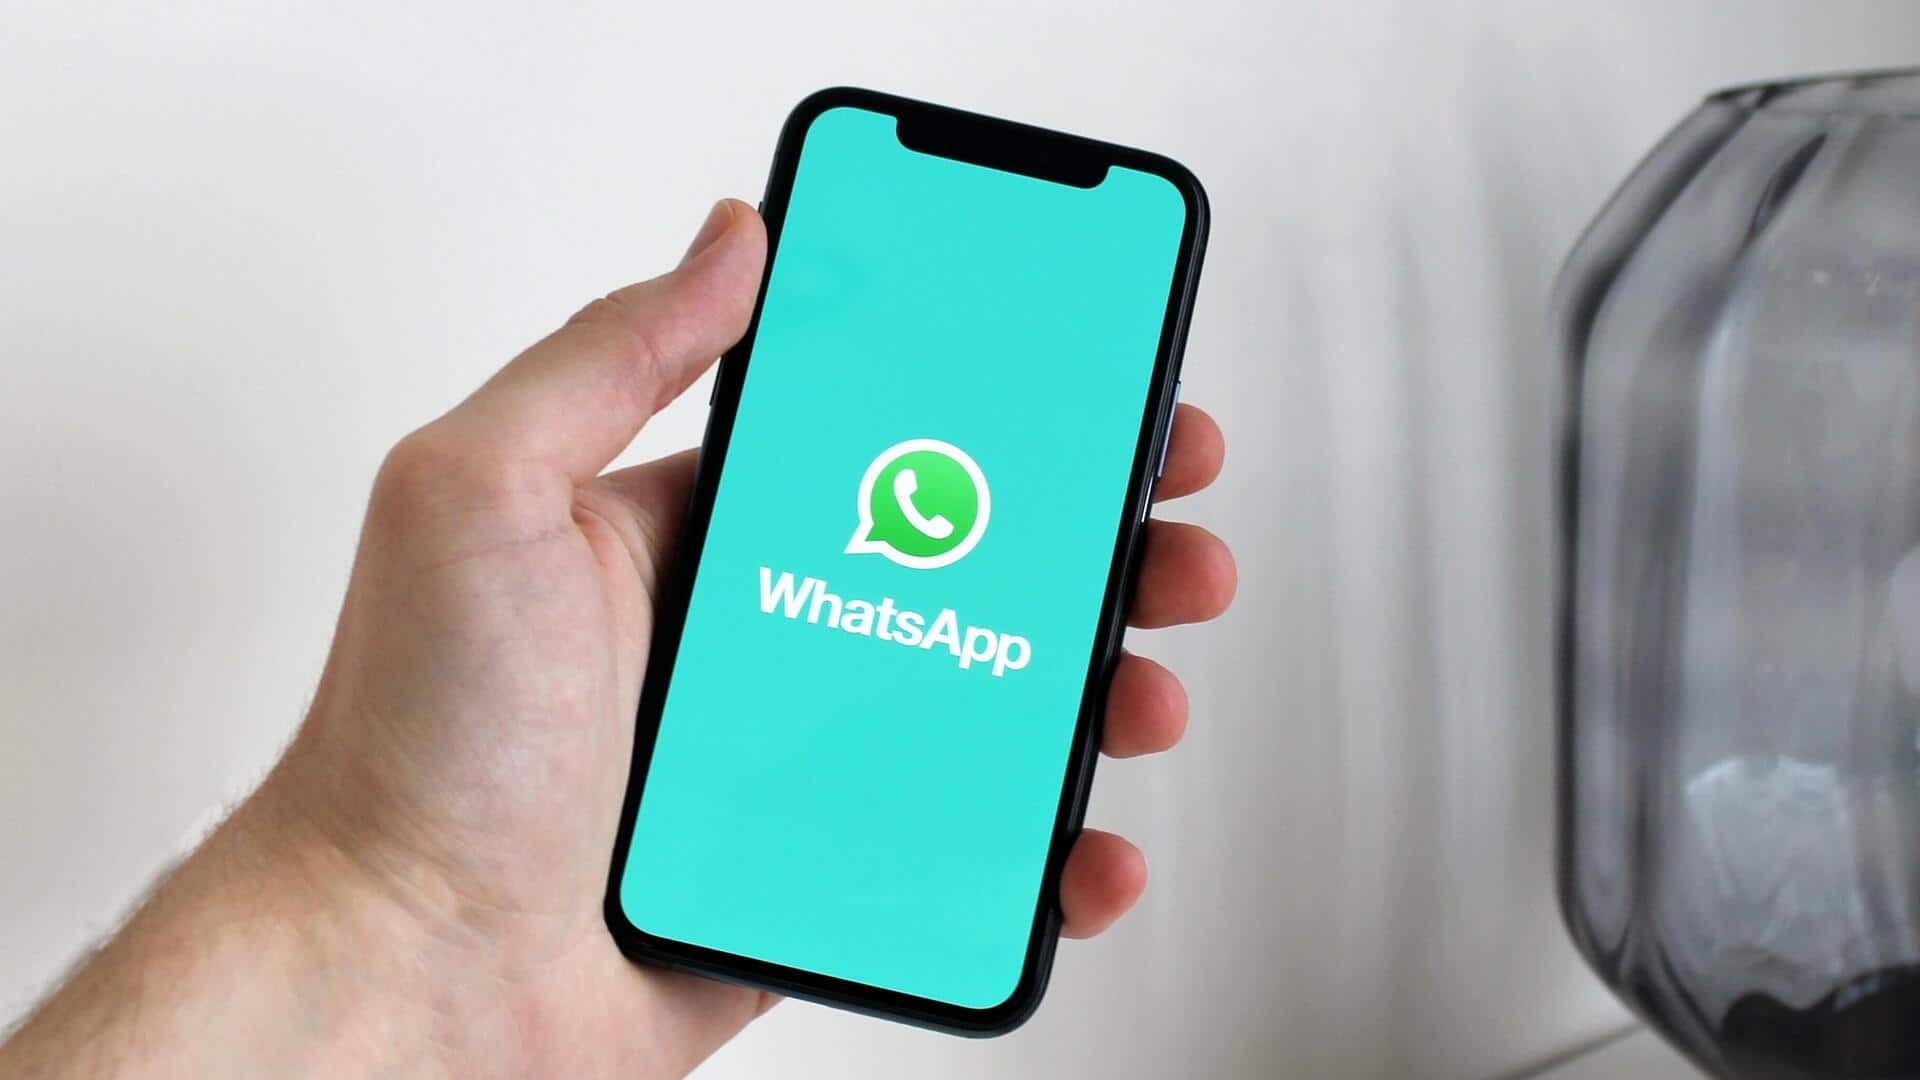 WhatsApp to get email verification security feature: What is it